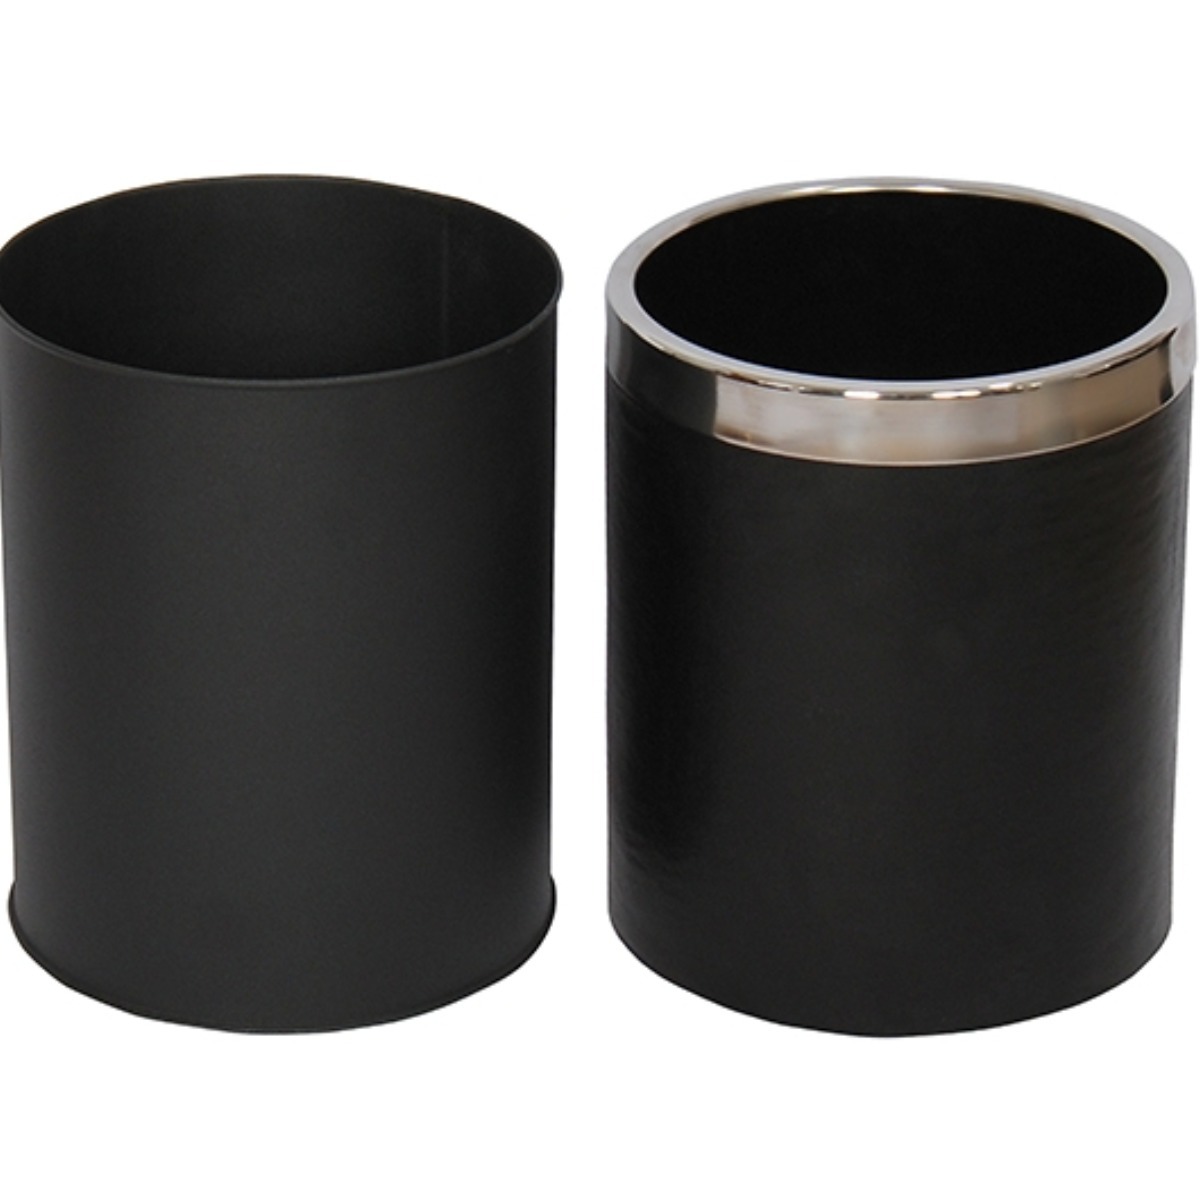 AB-306 Leather Lined Dustbin